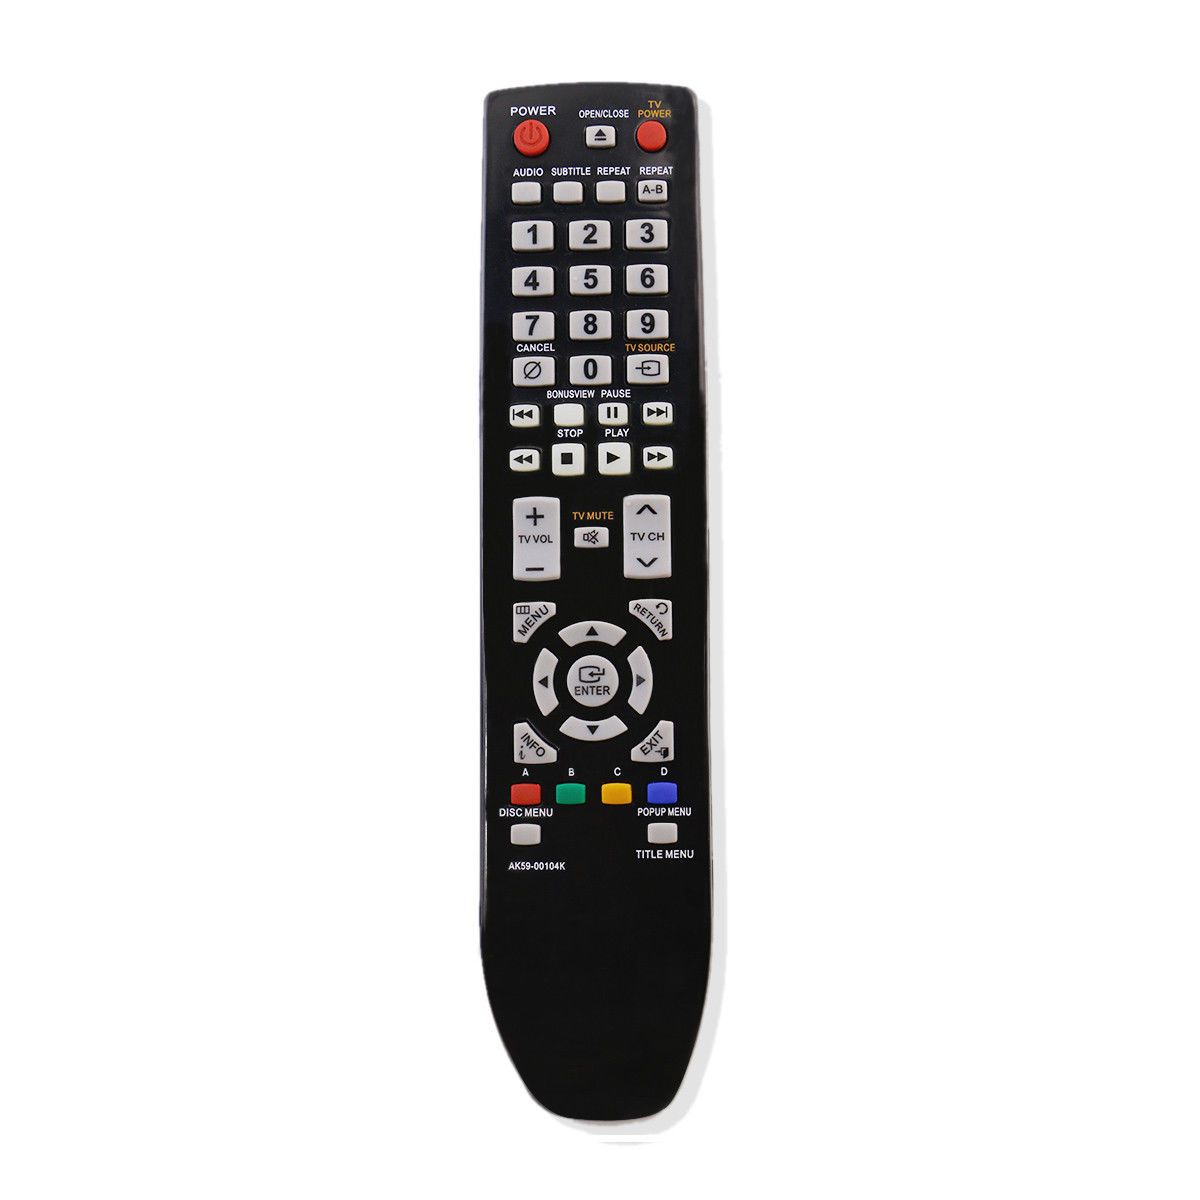 AK59-00104K Replacement Remote Control for Samsung Blu-Ray Disc Player BD-P1590